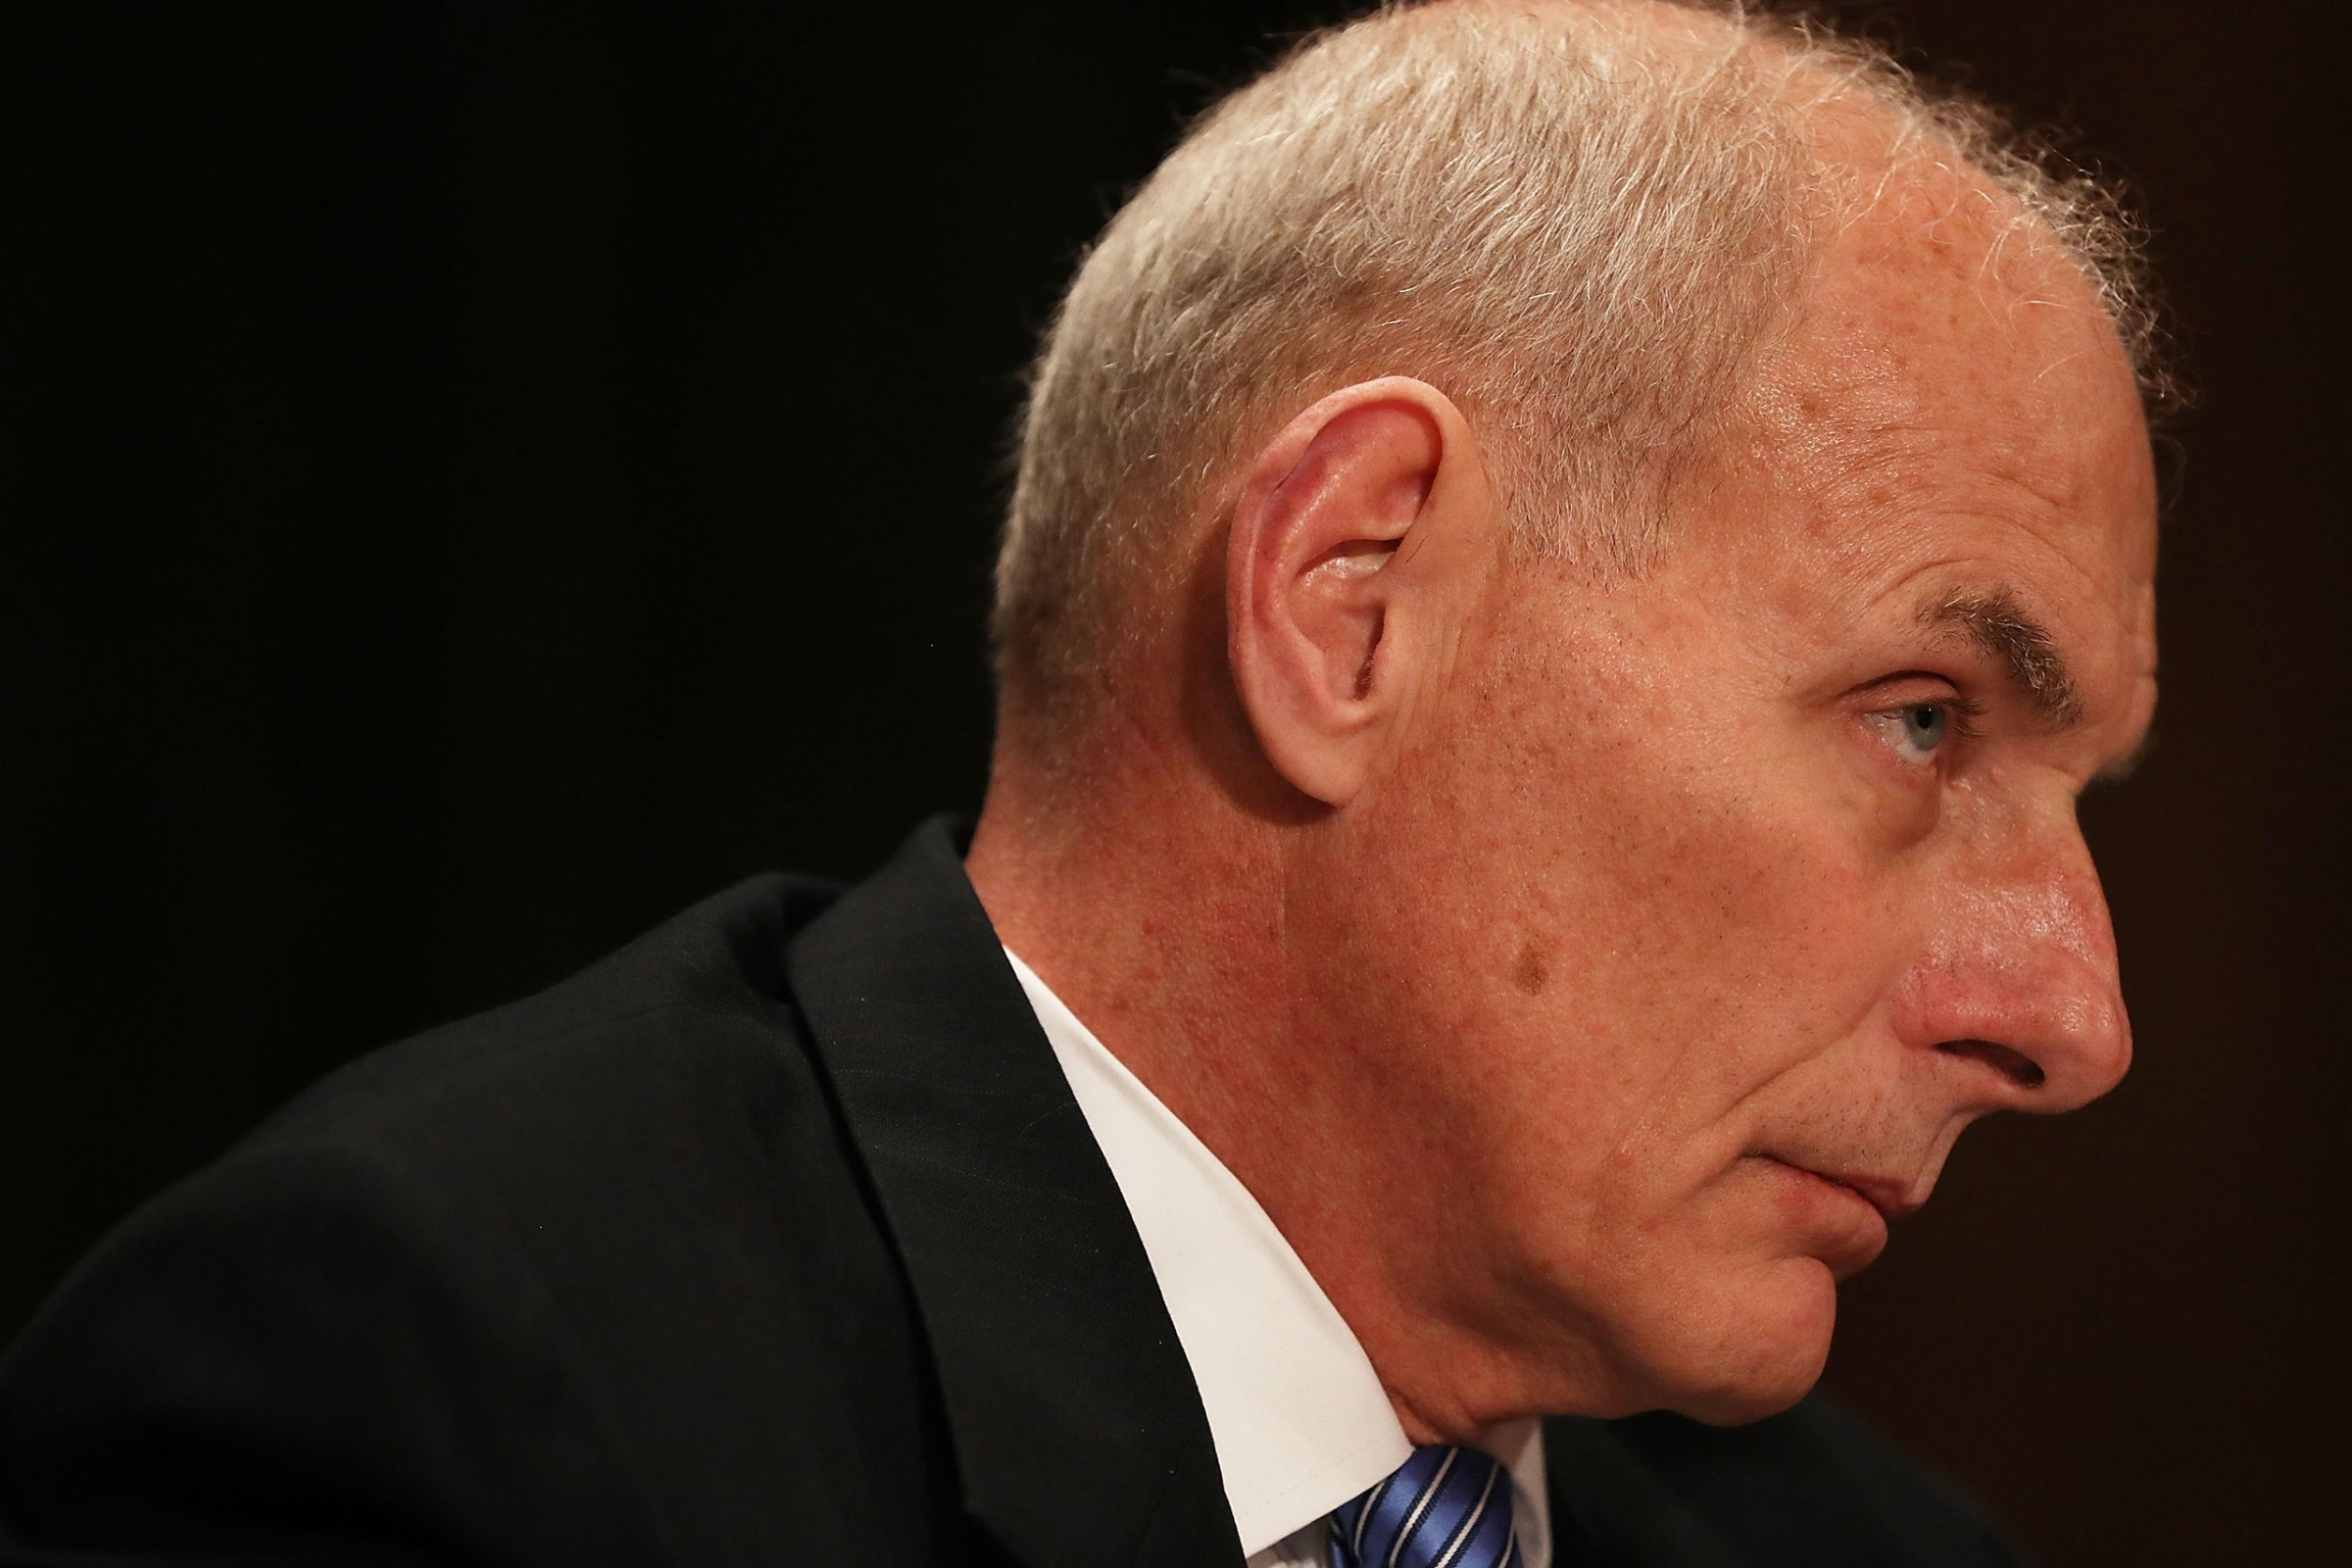 WASHINGTON, DC - JANUARY 10: Retired Marine Gen. John Kelly attends his confirmation hearing in front of the Senate Homeland Security and Governmental Affairs Committee to run the Department of Homeland Security on January 10, 2017 in Washington, DC. The Department he is up to run is responsible for among other items border security and immigration control. (Photo by Joe Raedle/Getty Images)